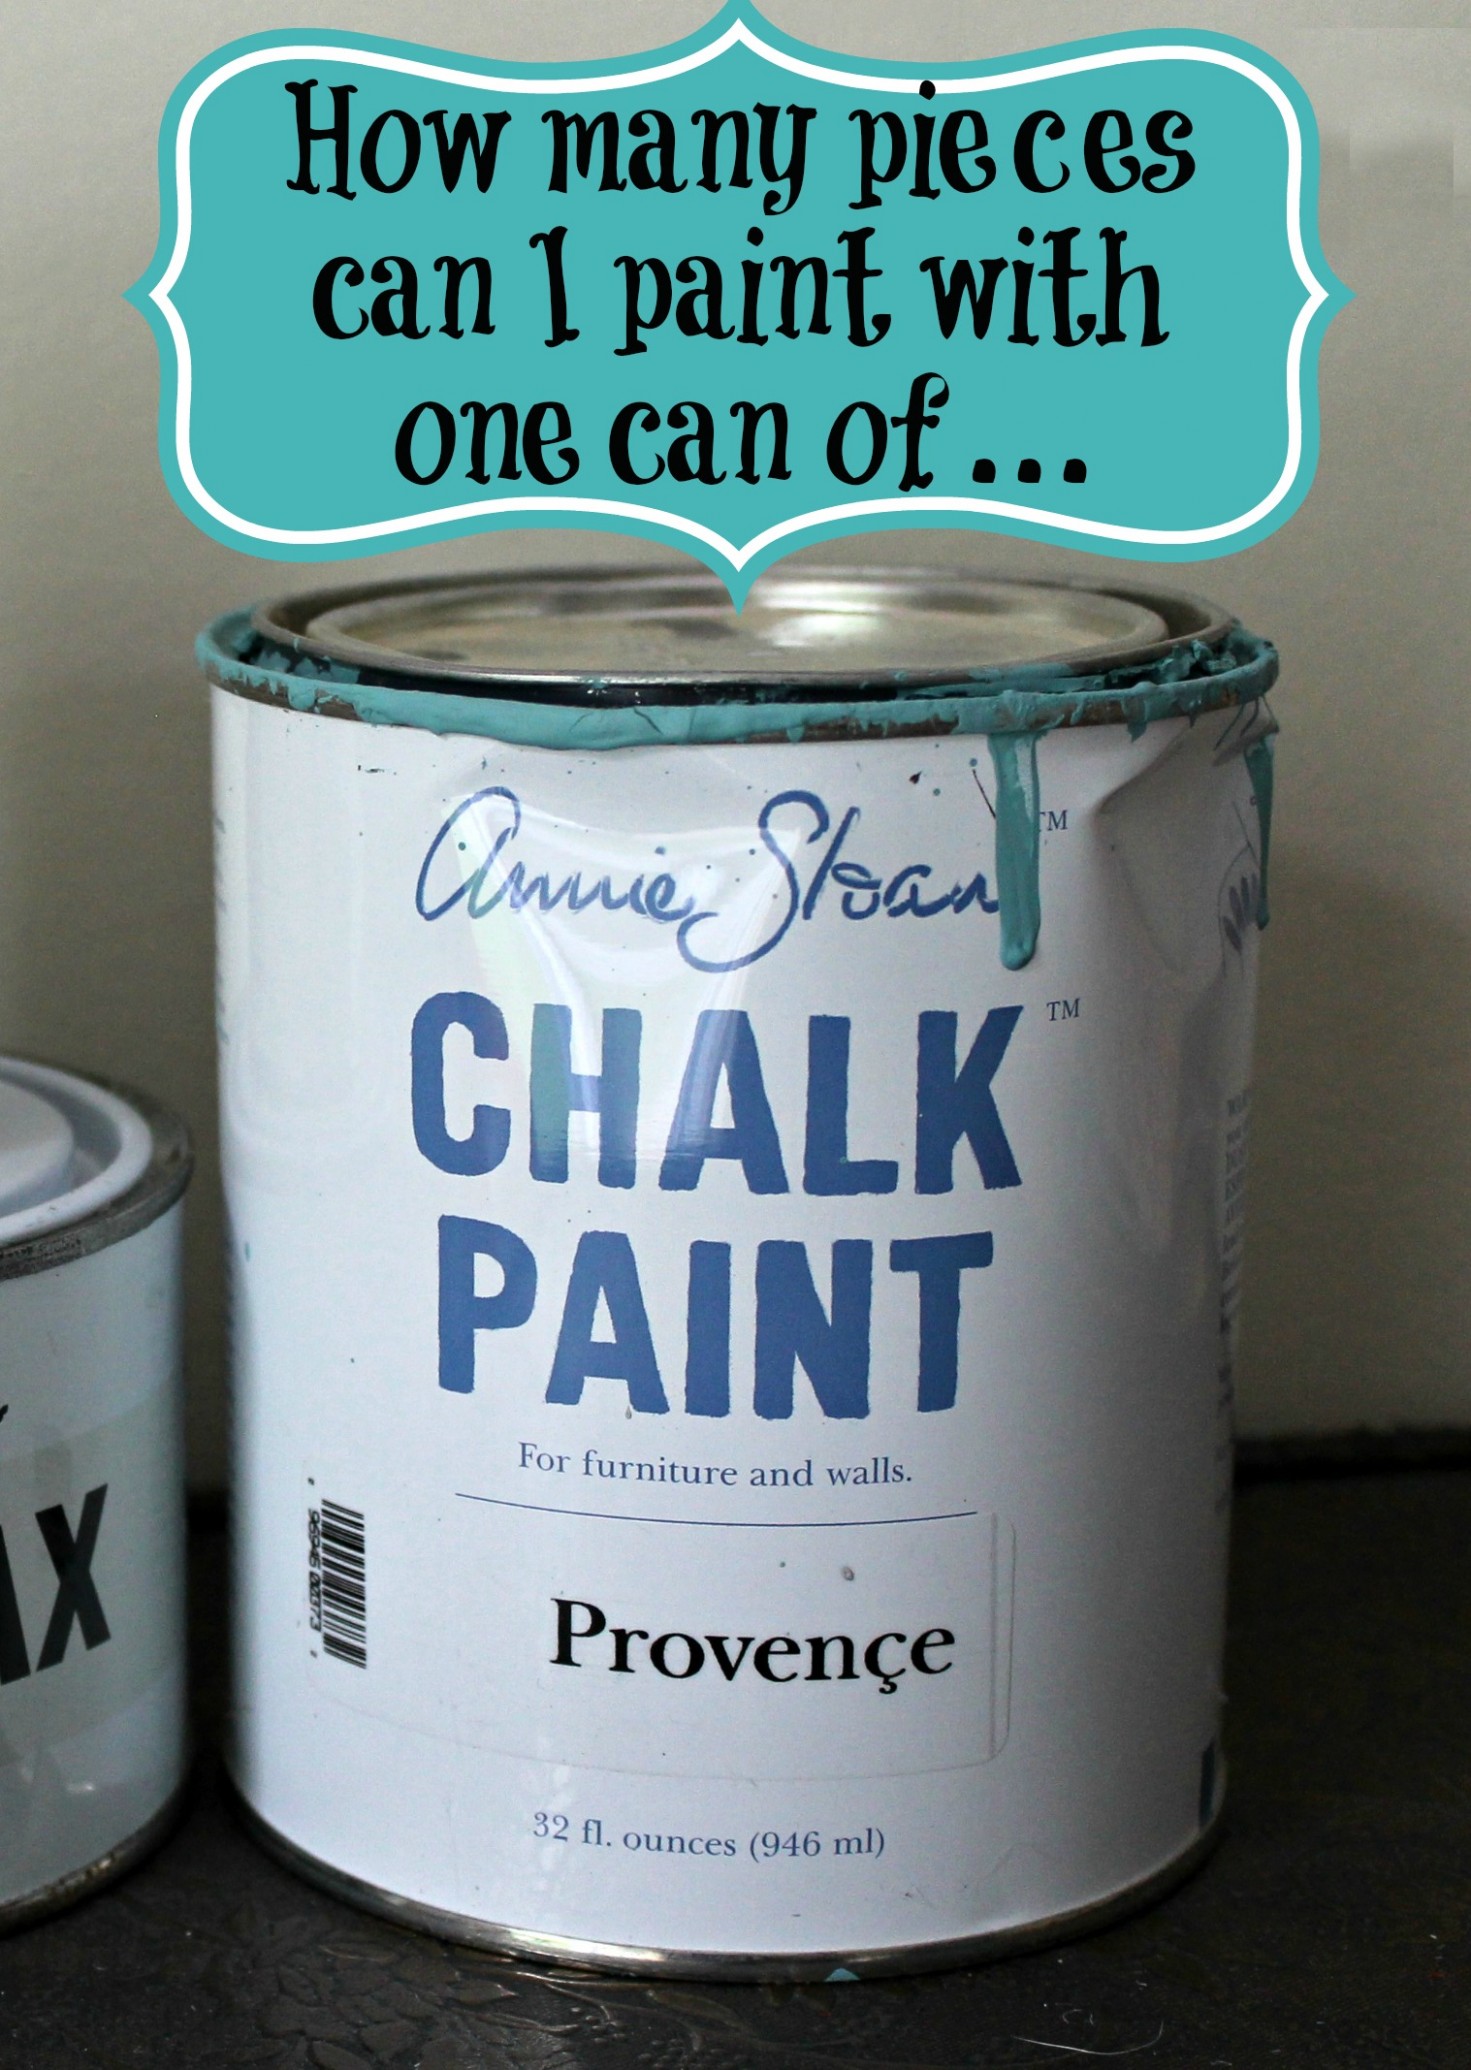 Top 10 Popular Diy Posts Of 2014 Where To Buy Chalk Paint For Furniture Near Me